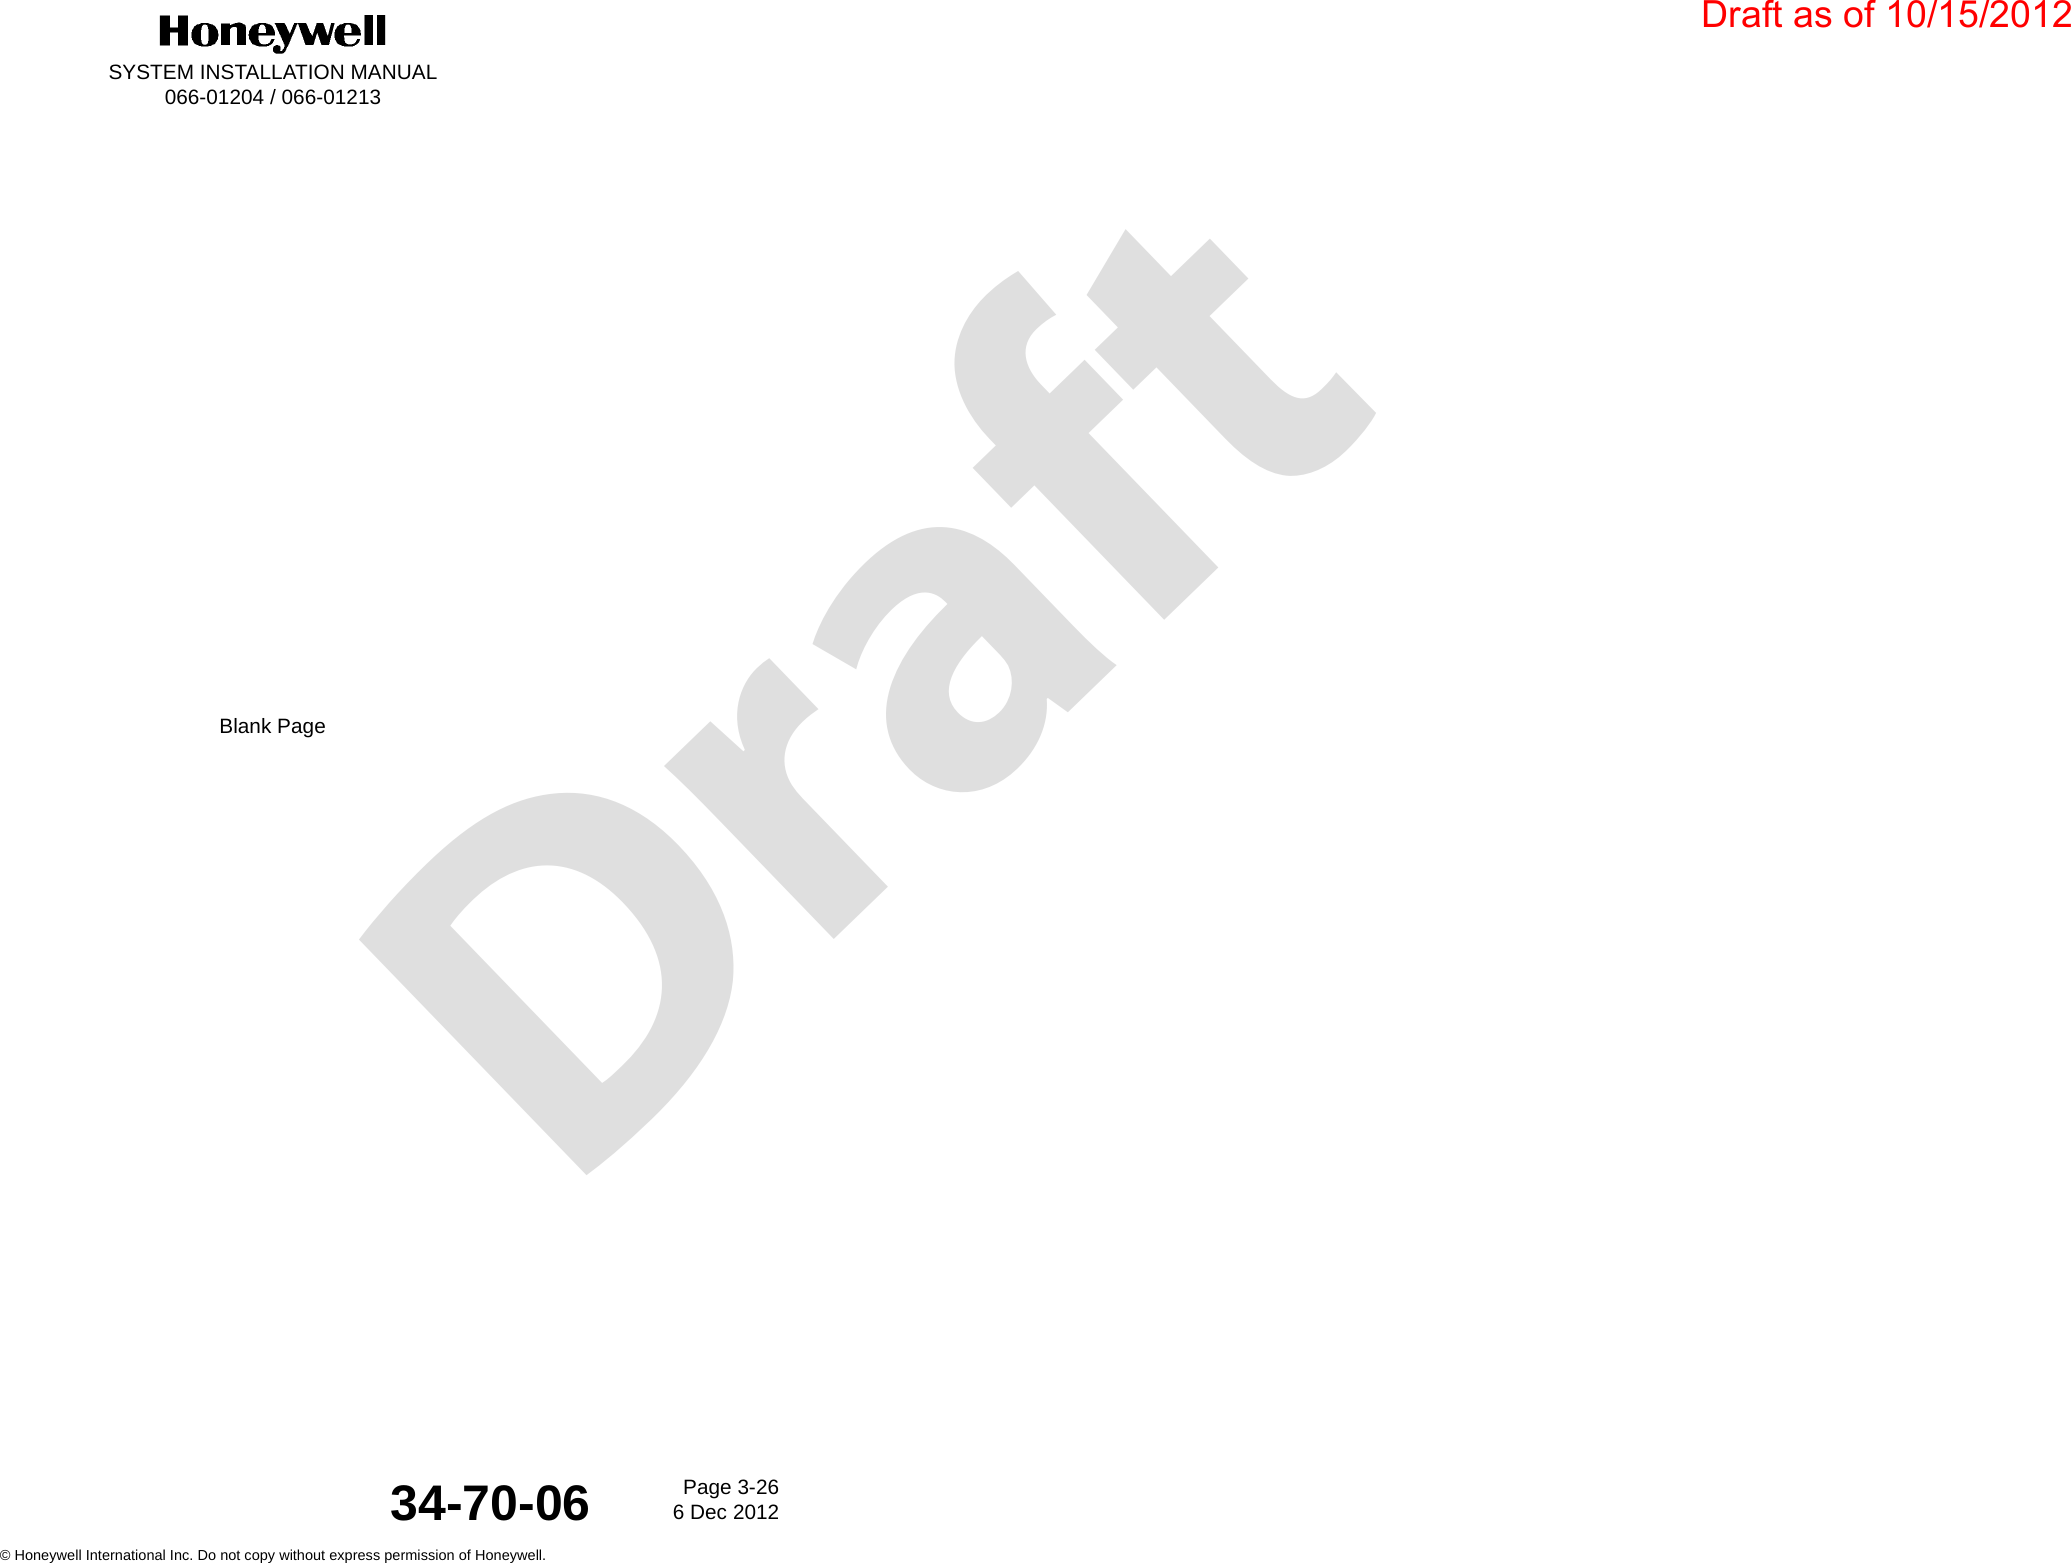 DraftSYSTEM INSTALLATION MANUAL066-01204 / 066-01213Page 3-266 Dec 2012© Honeywell International Inc. Do not copy without express permission of Honeywell.34-70-06Blank PageDraft as of 10/15/2012